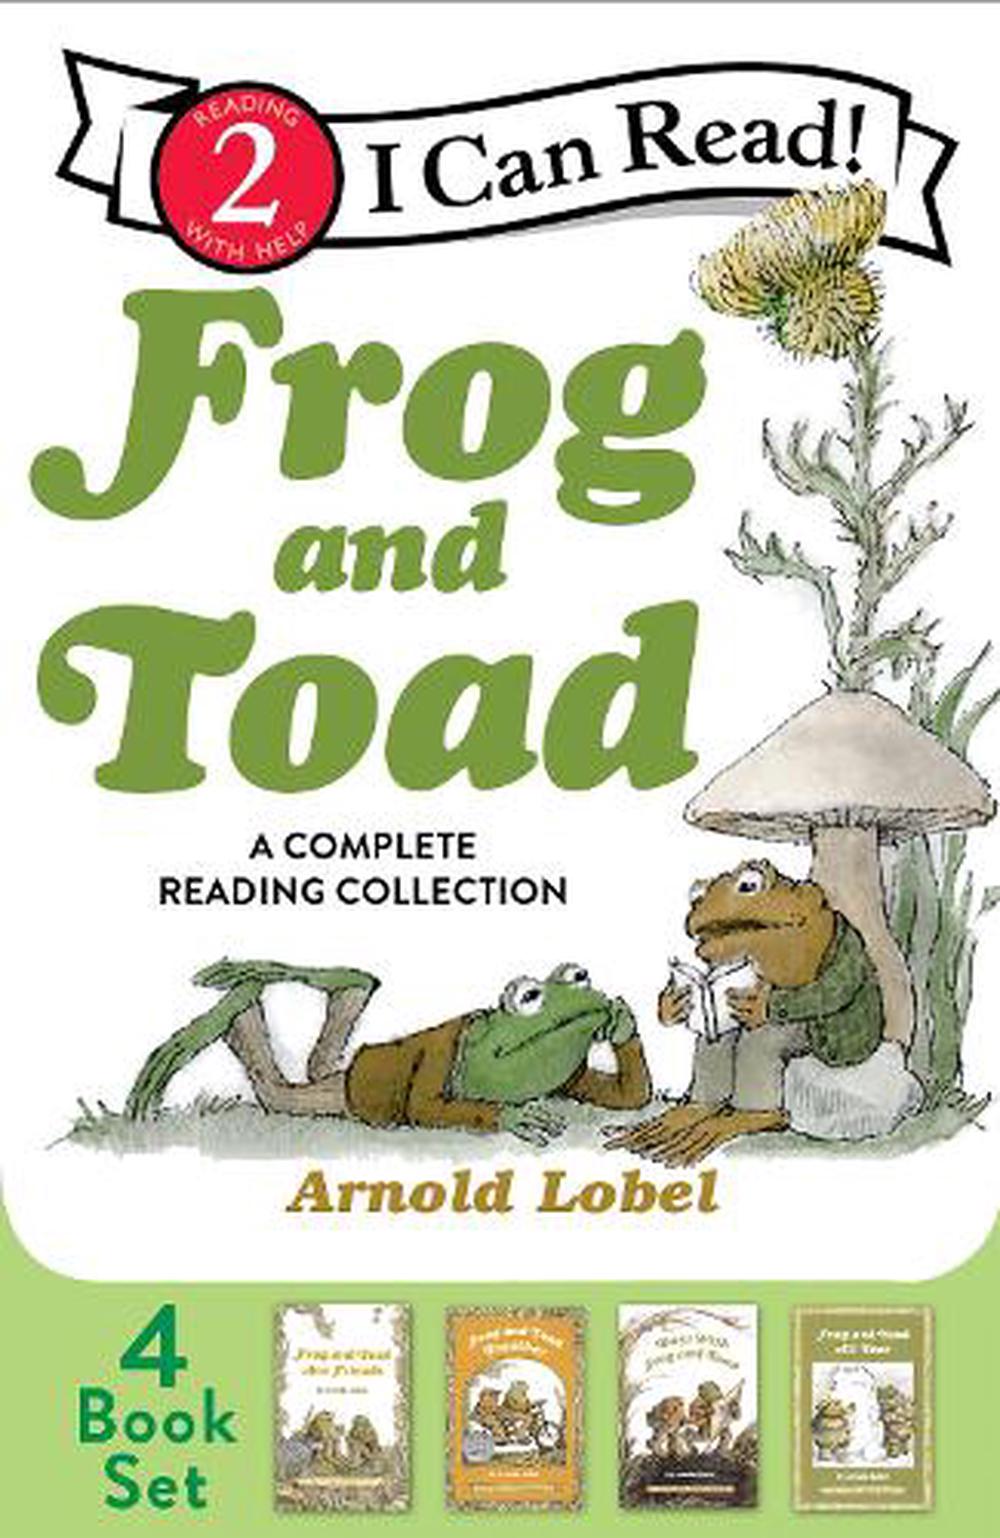 Frog　9780062983428　and　Toad　at　The　Paperback,　by　Arnold　online　Lobel,　Buy　Nile